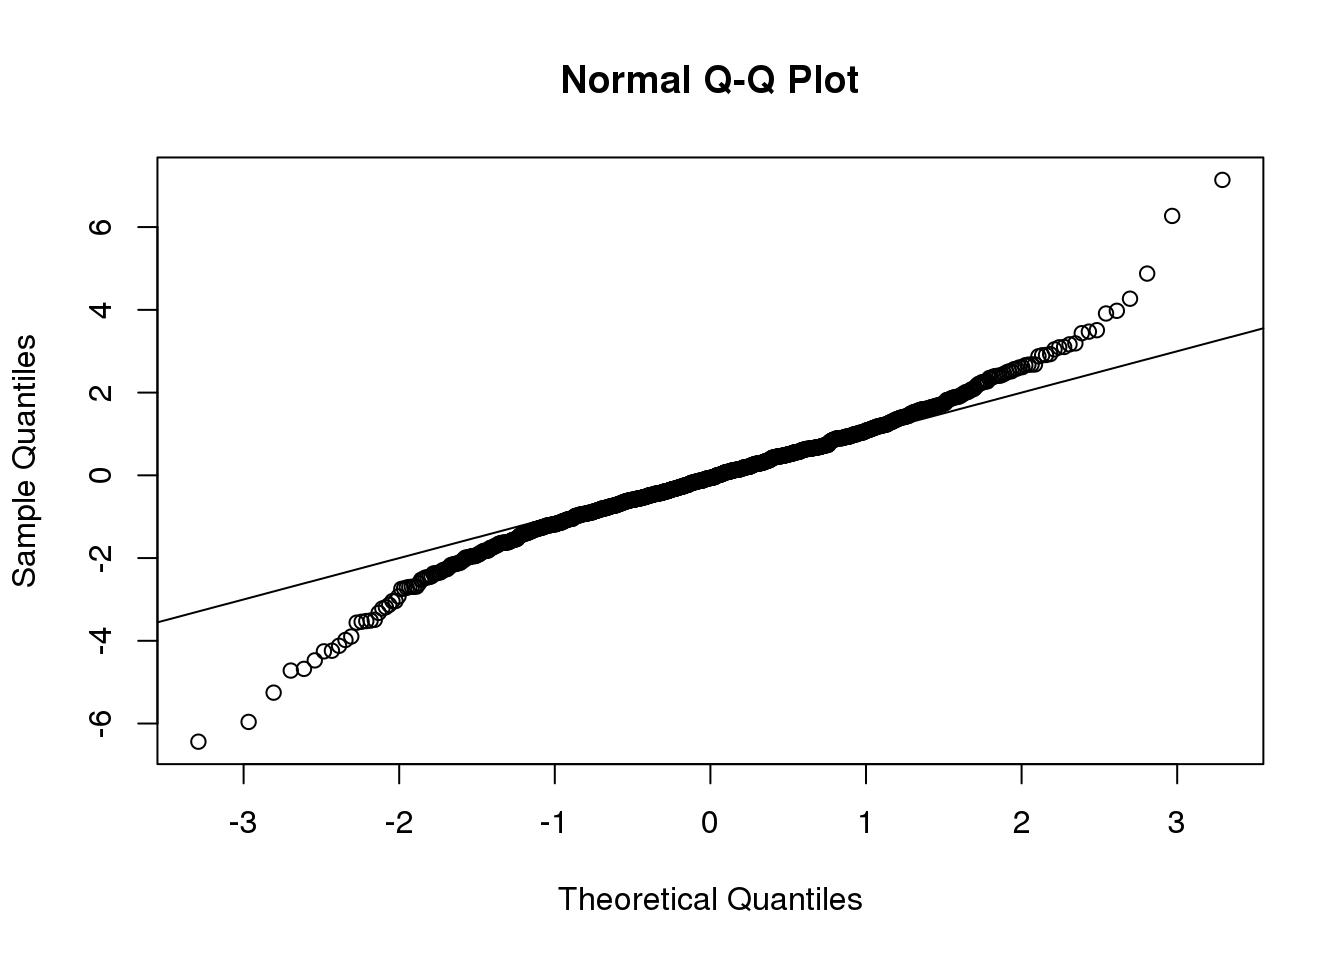 Quantile-quantile plot comparing 1000 Monte Carlo simulated t-statistics with three degrees of freedom to theoretical normal distribution.